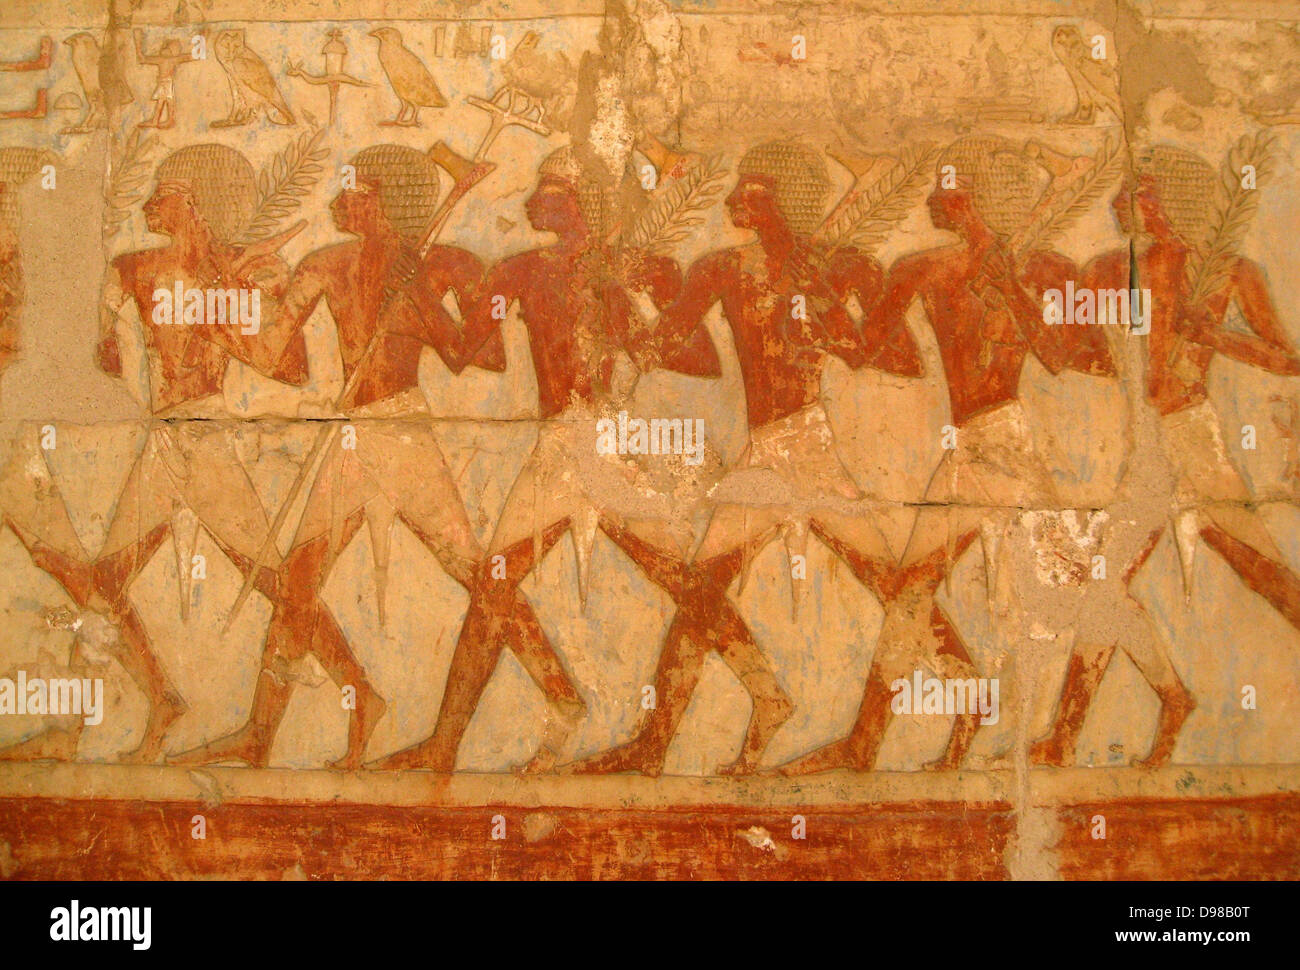 Relief showing members of Queen Hatshepsut's trading expedition to the mysterious 'Land of Punt' from this pharaoh's elegant mortuary temple at Deir El-Bahri. Hatshepsut, 18th Dynasty, reigned 1503-1482 BC. Stock Photo